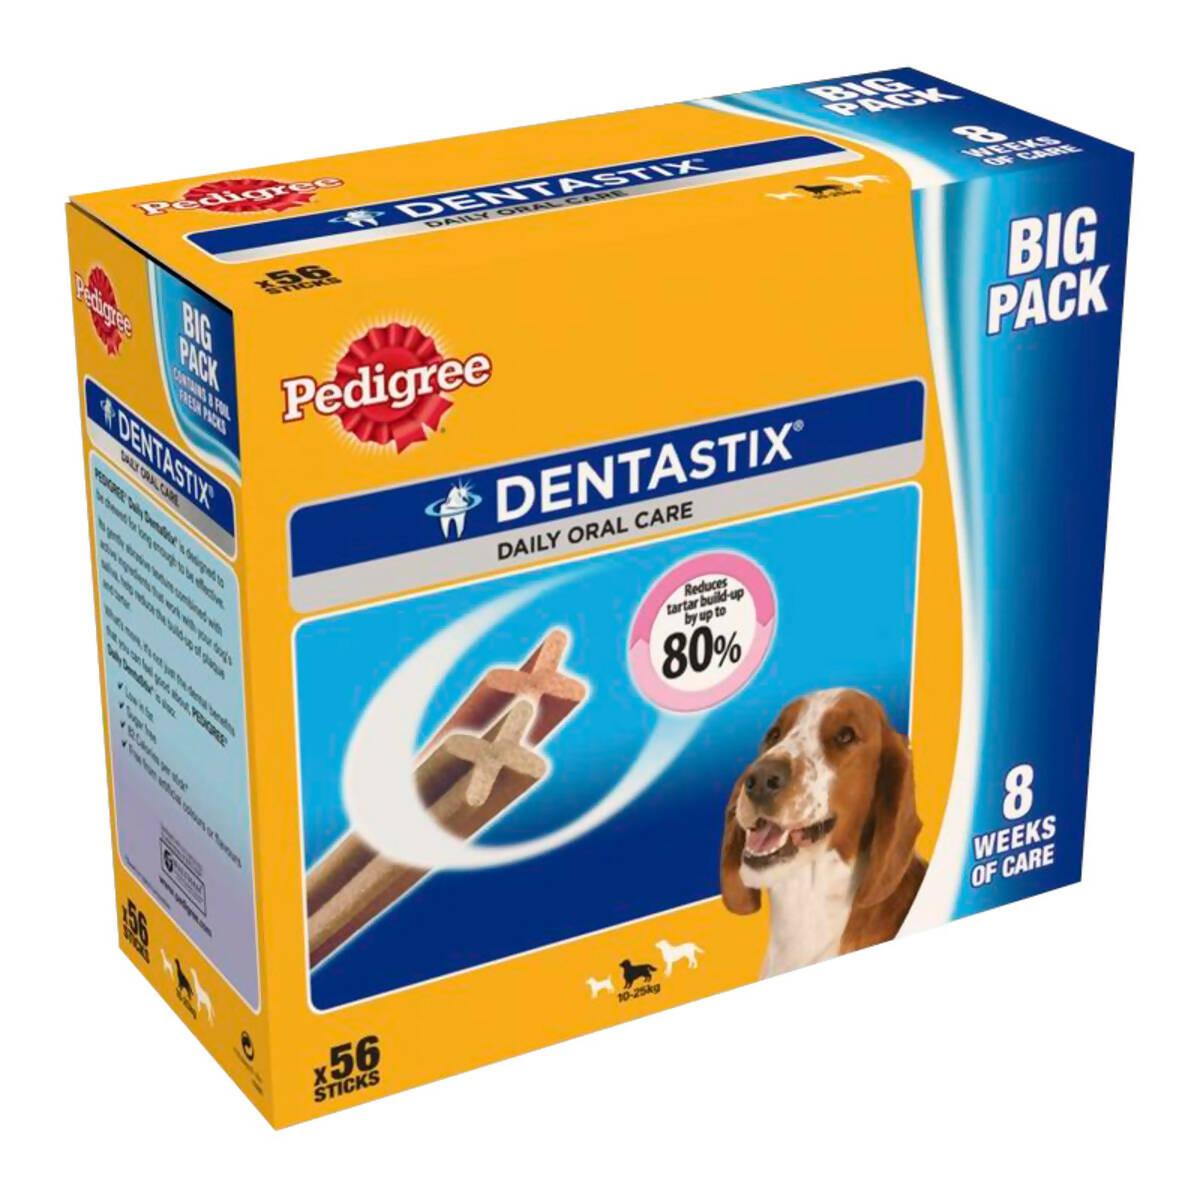 Pedigree Dentastix Daily Oral Care For Medium Dogs, 56 pack Pets Costco UK   